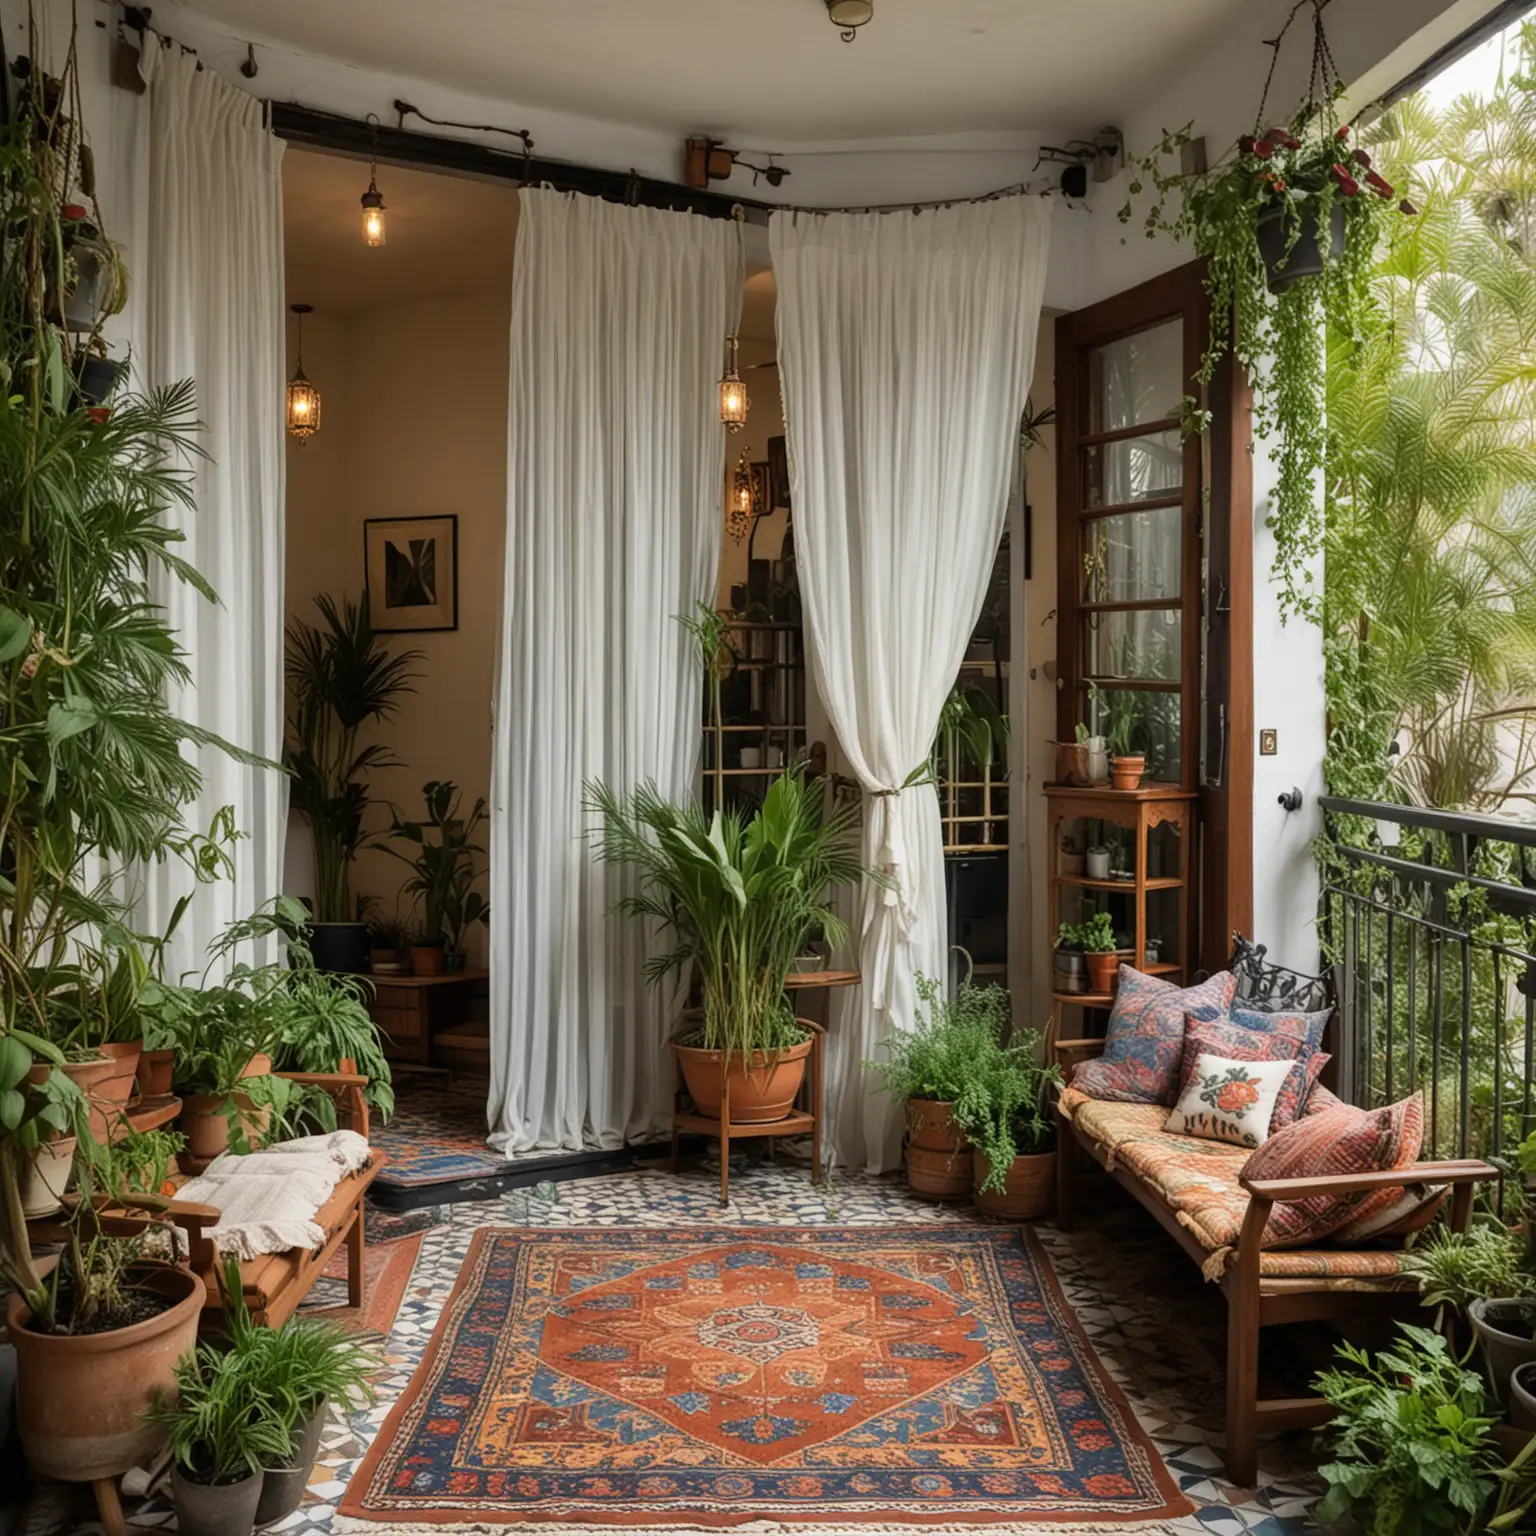 A wide shot  A small, tiled balcony with a bohemian vibe. The space includes a low wooden bench with vibrant, patterned pillows, a woven rug, and a macrame hanging chair. Various potted plants, including spider plants and hanging ivy, add greenery. Lantern-style lights and a beaded curtain at the balcony entrance enhance the boho feel. The balcony has wooden doors with glass panes and sheer curtains blowing gently in the breeze.